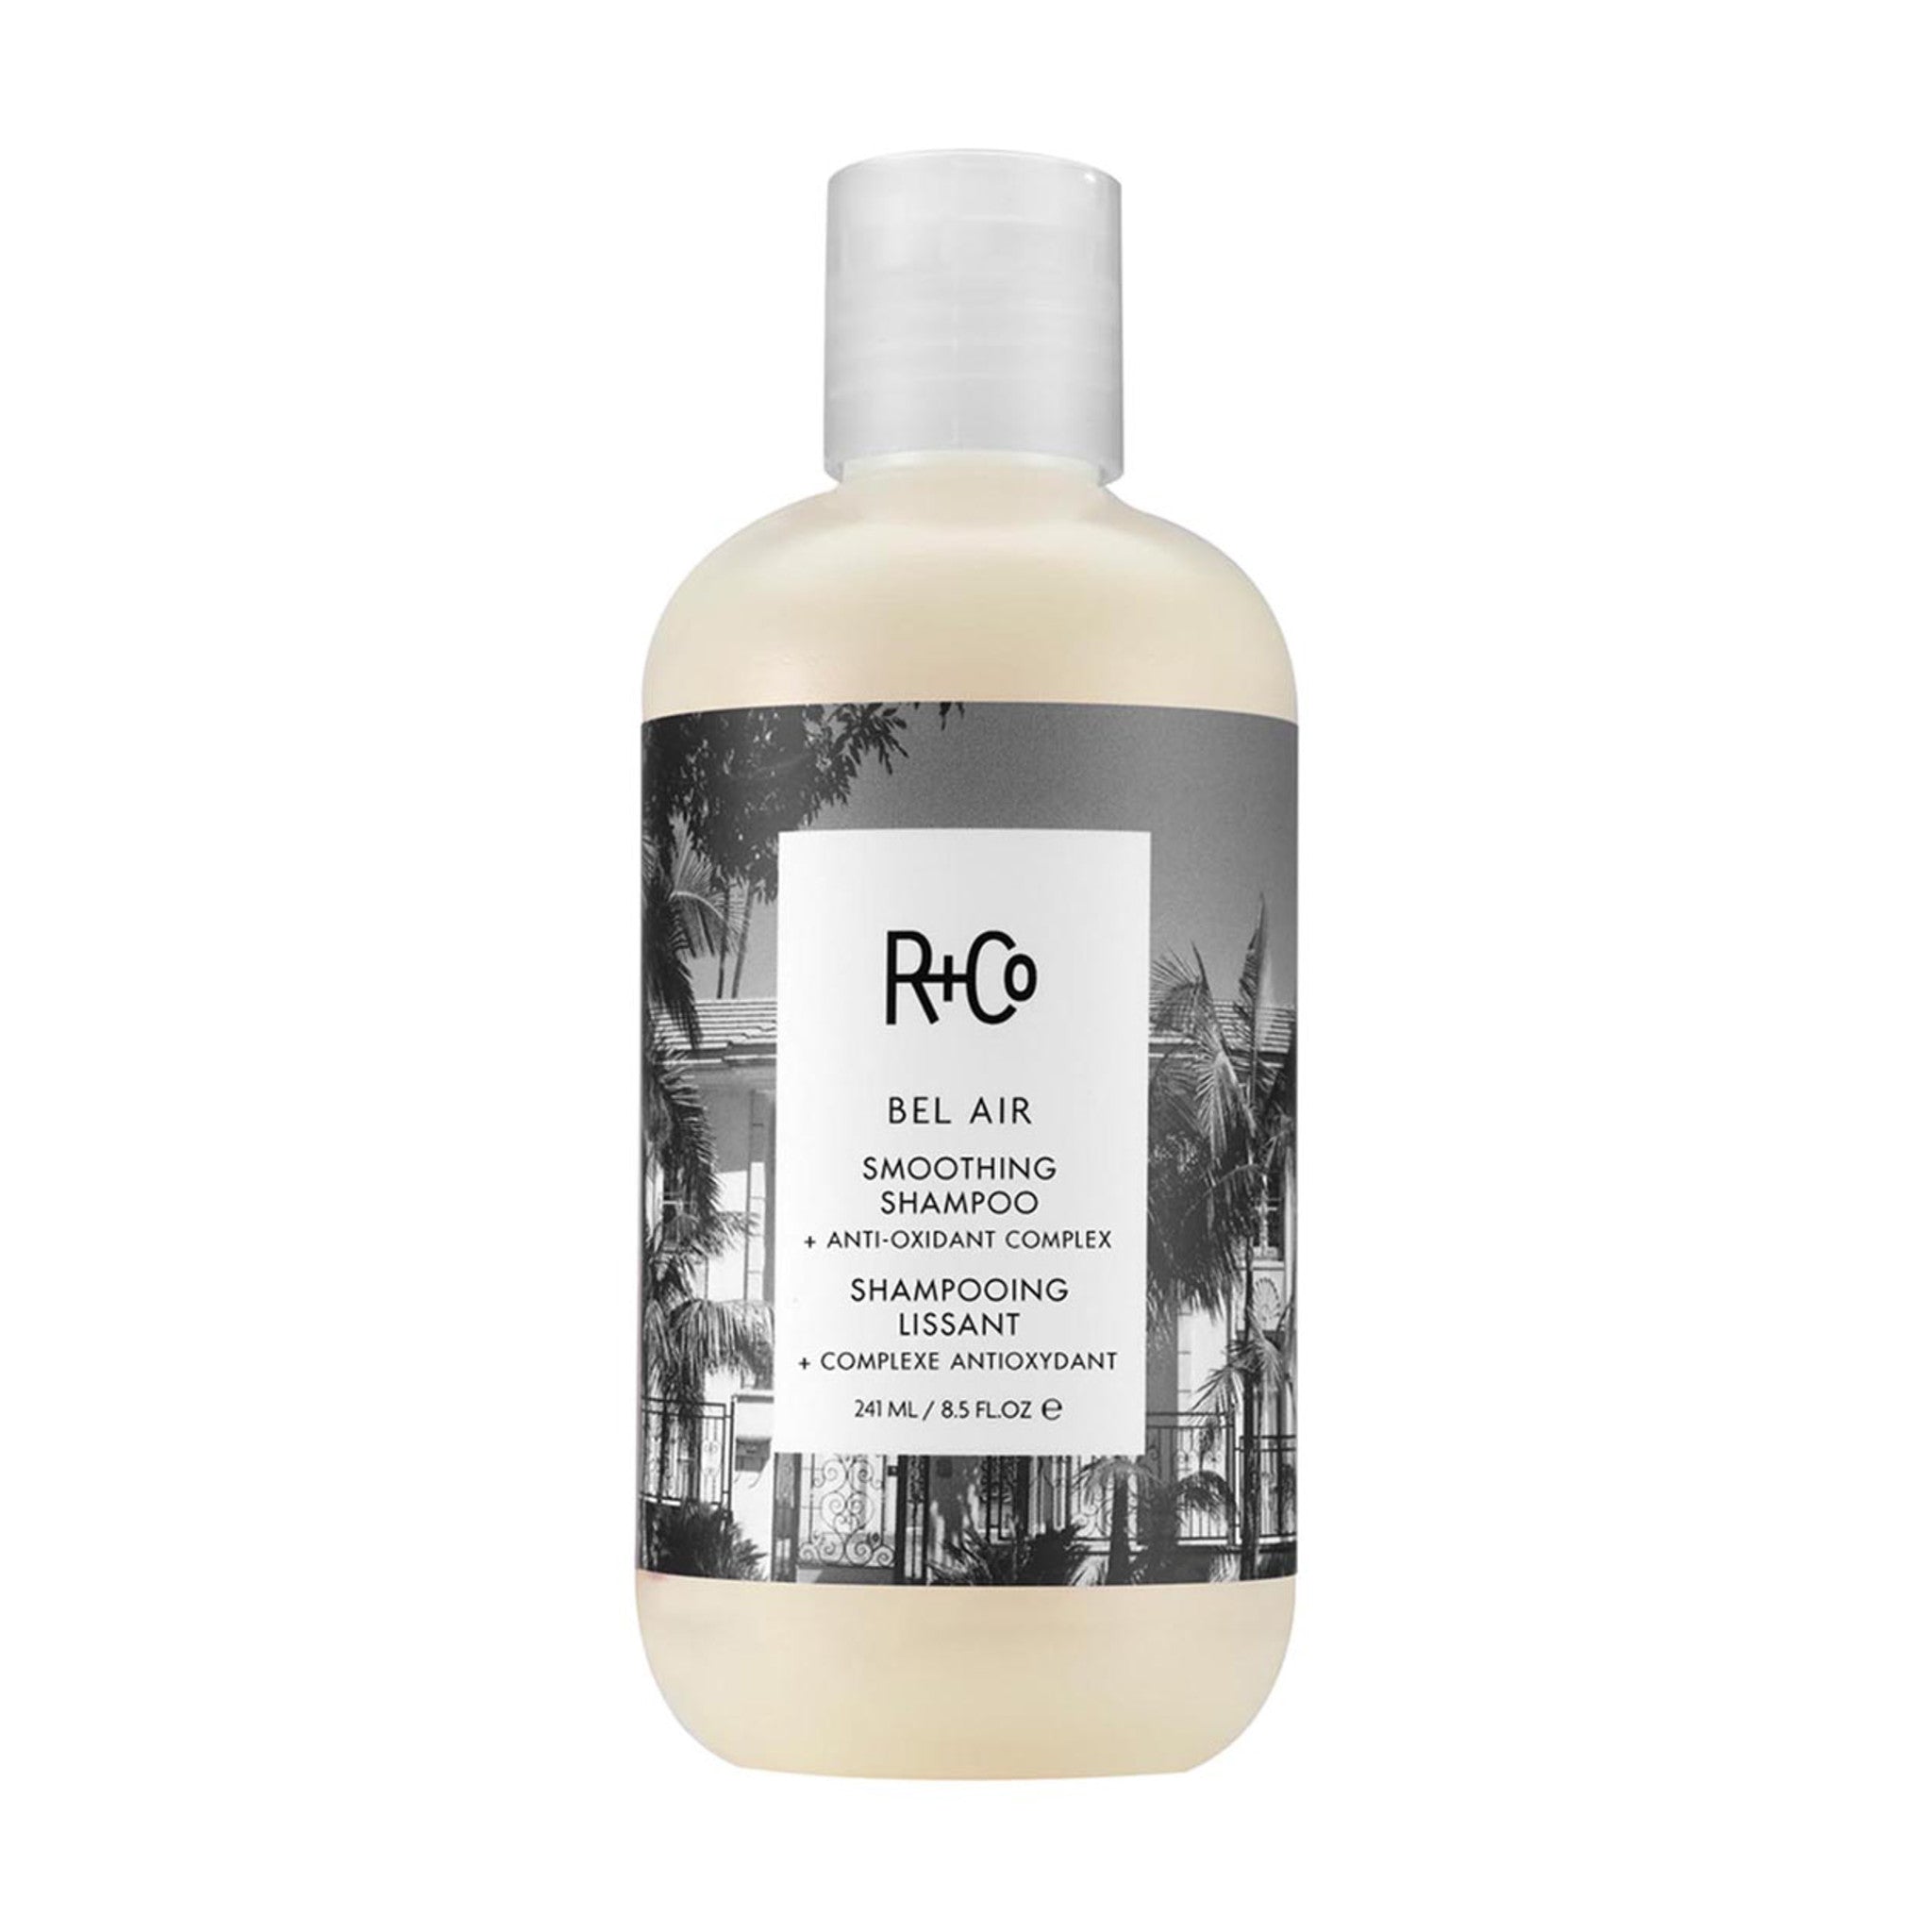 R+Co Bel Air Smoothing Shampoo and Anti-Oxidant Complex Size variant: main image.